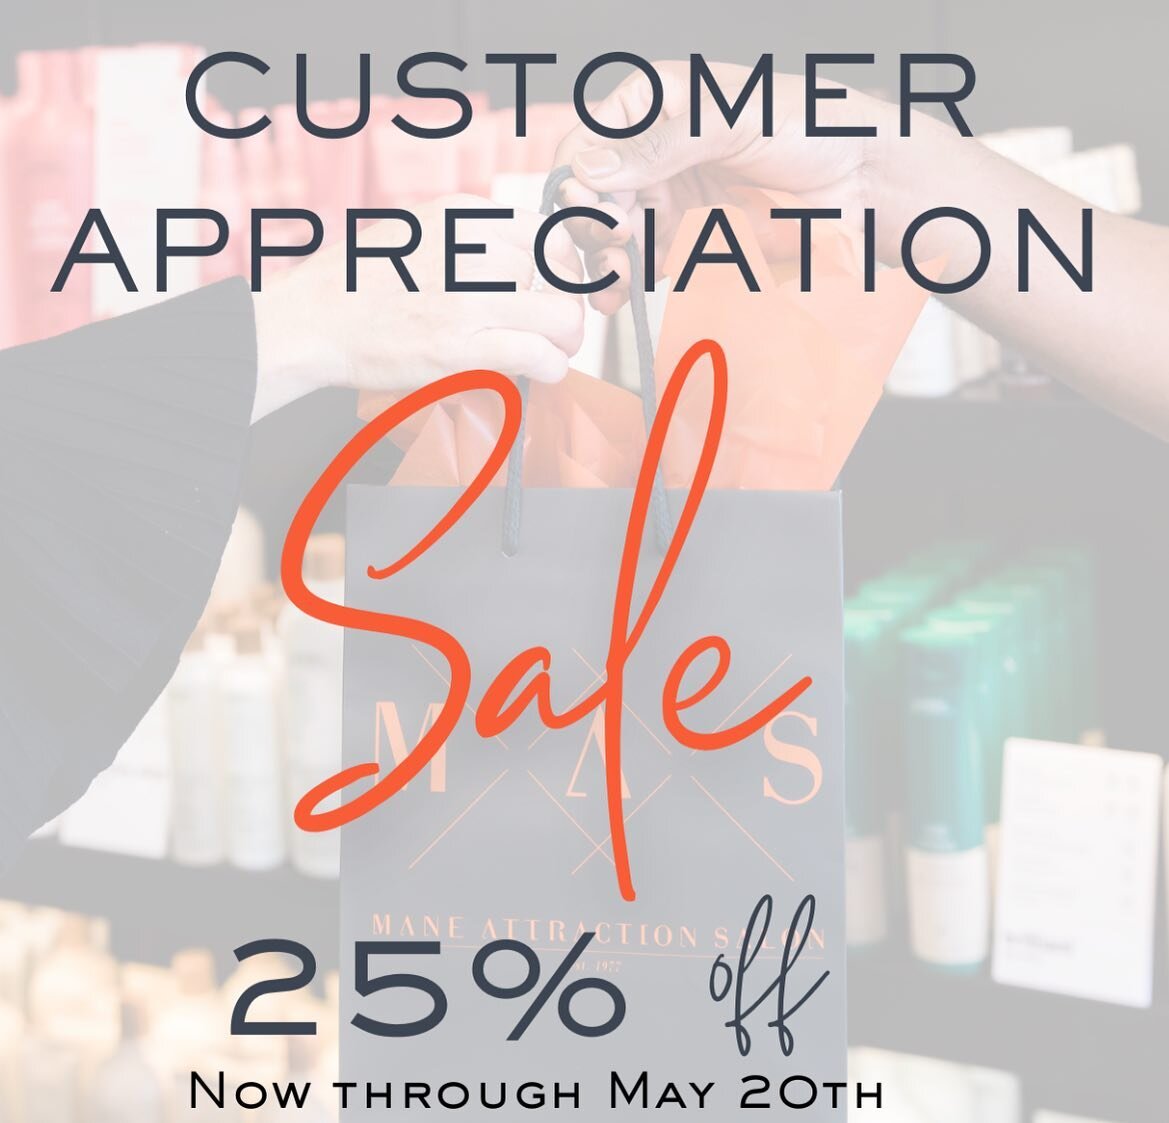 To all of our valued clients, our Client Appreciation Sale is on now through May 20th! Enjoy 25% off all product purchases in the MAS Shop. Plus, join us for two special events this week: 

Thursday, May 18th - Special guest Connie Estenson will be i